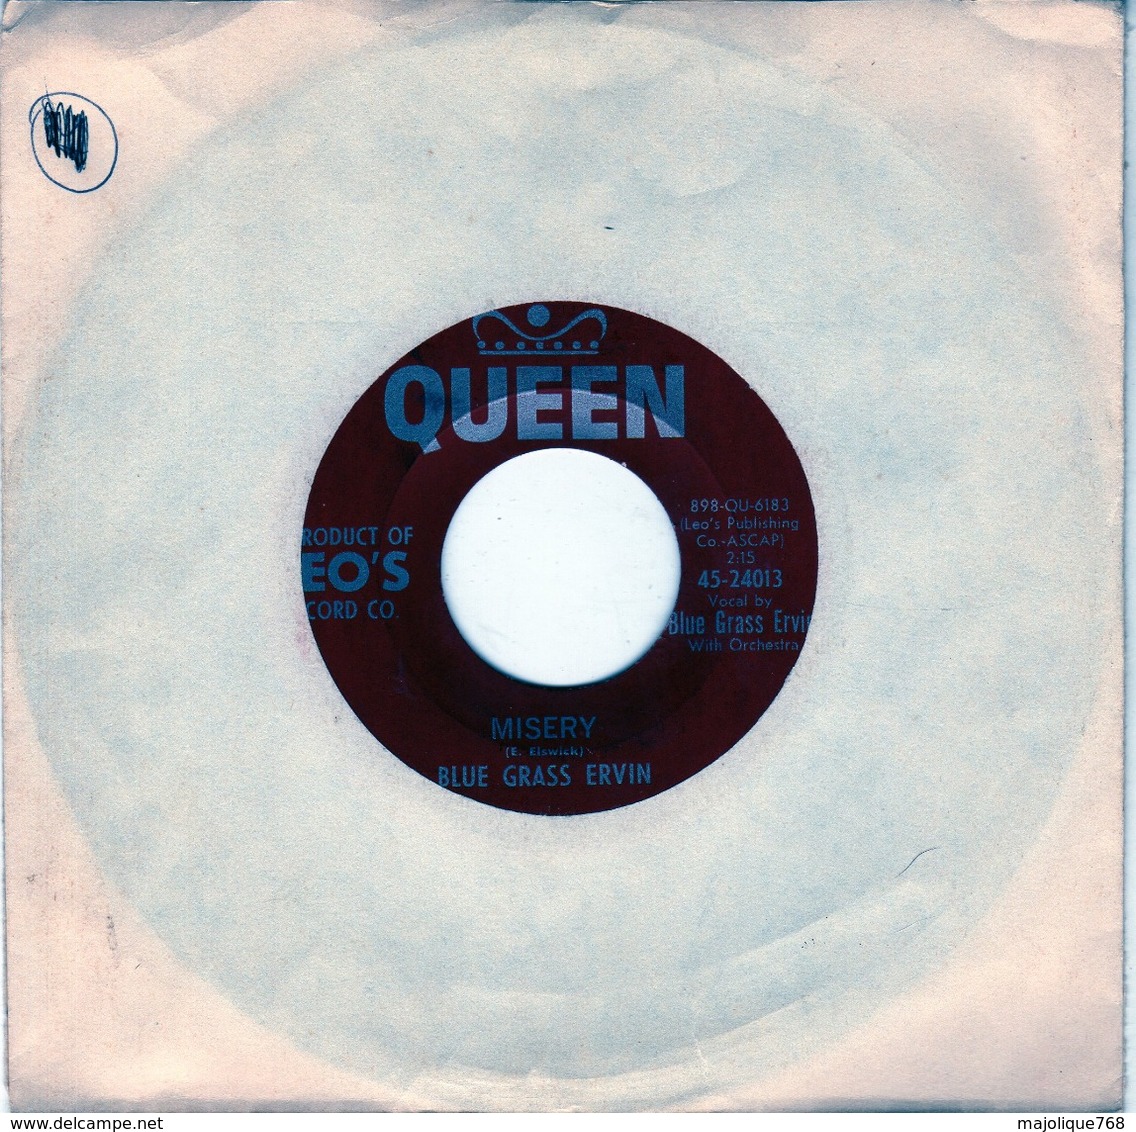 Blue Grass Ervin - Misery - I Won't Cry Alone - Queen 45-24013 - 1962 - - Country Y Folk